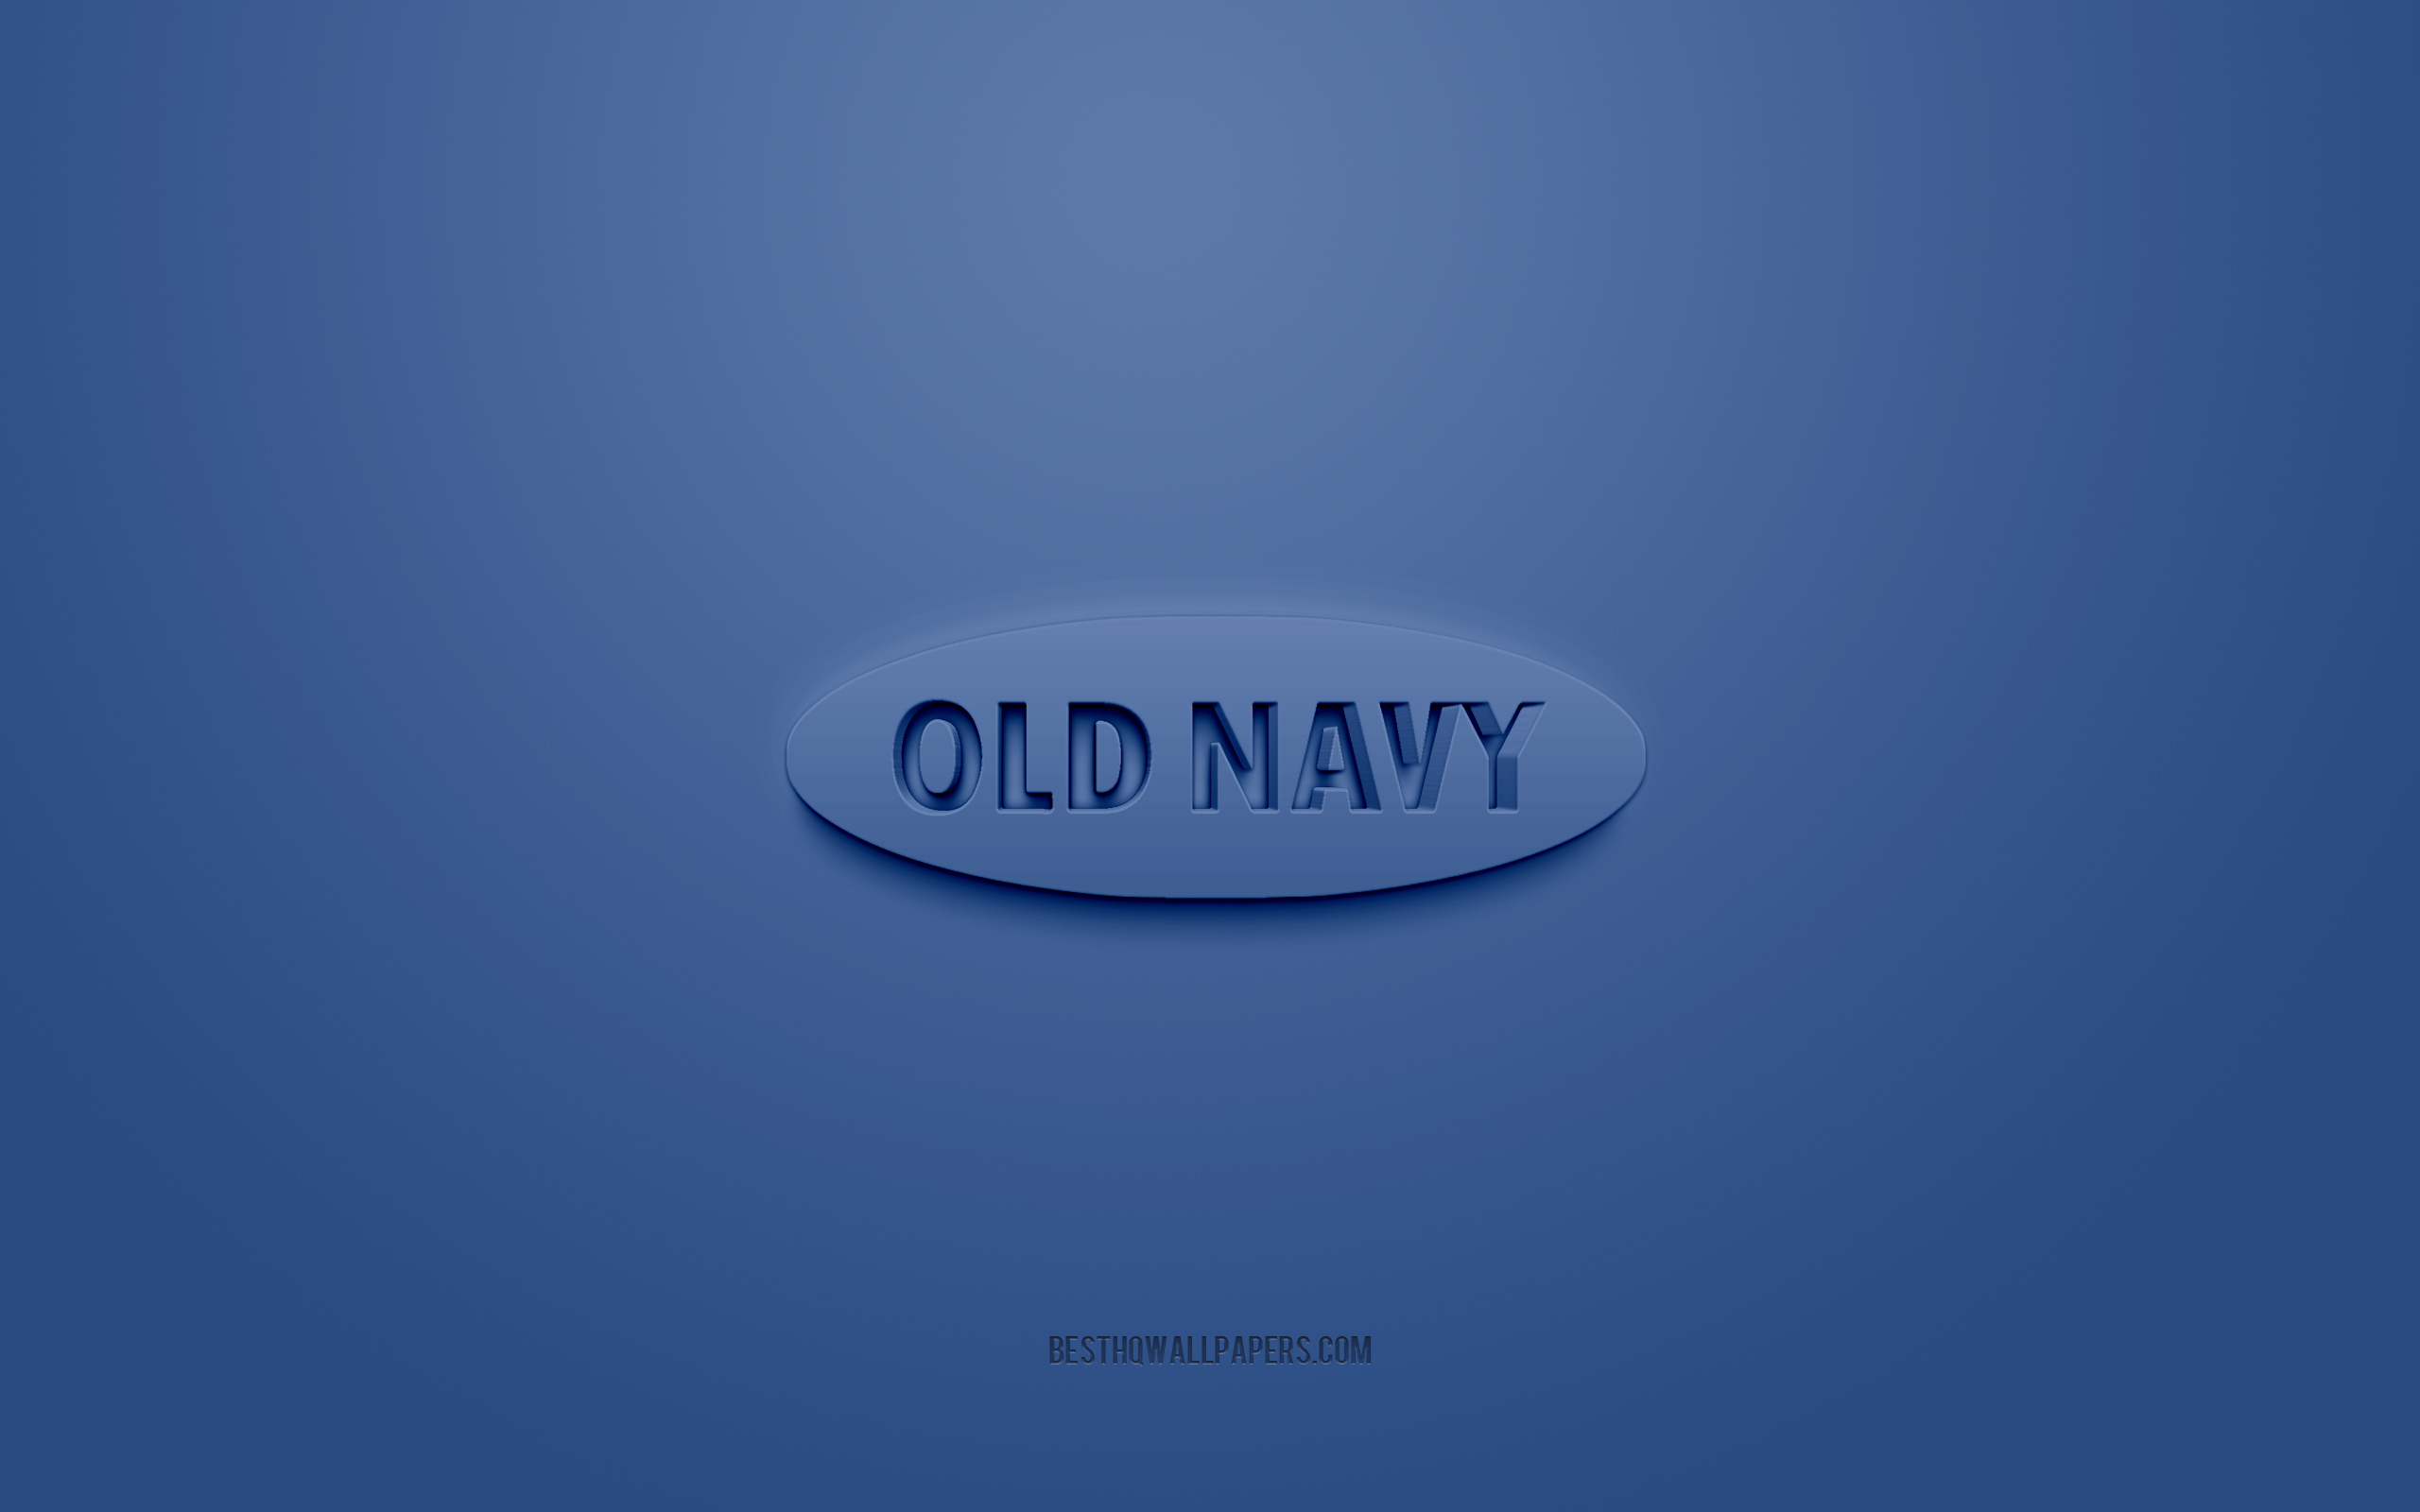 Download wallpaper Old Navy logo, blue background, Old Navy 3D logo, 3D art, Old Navy, brands logo, blue 3D Old Navy logo for desktop with resolution 2560x1600. High Quality HD picture wallpaper